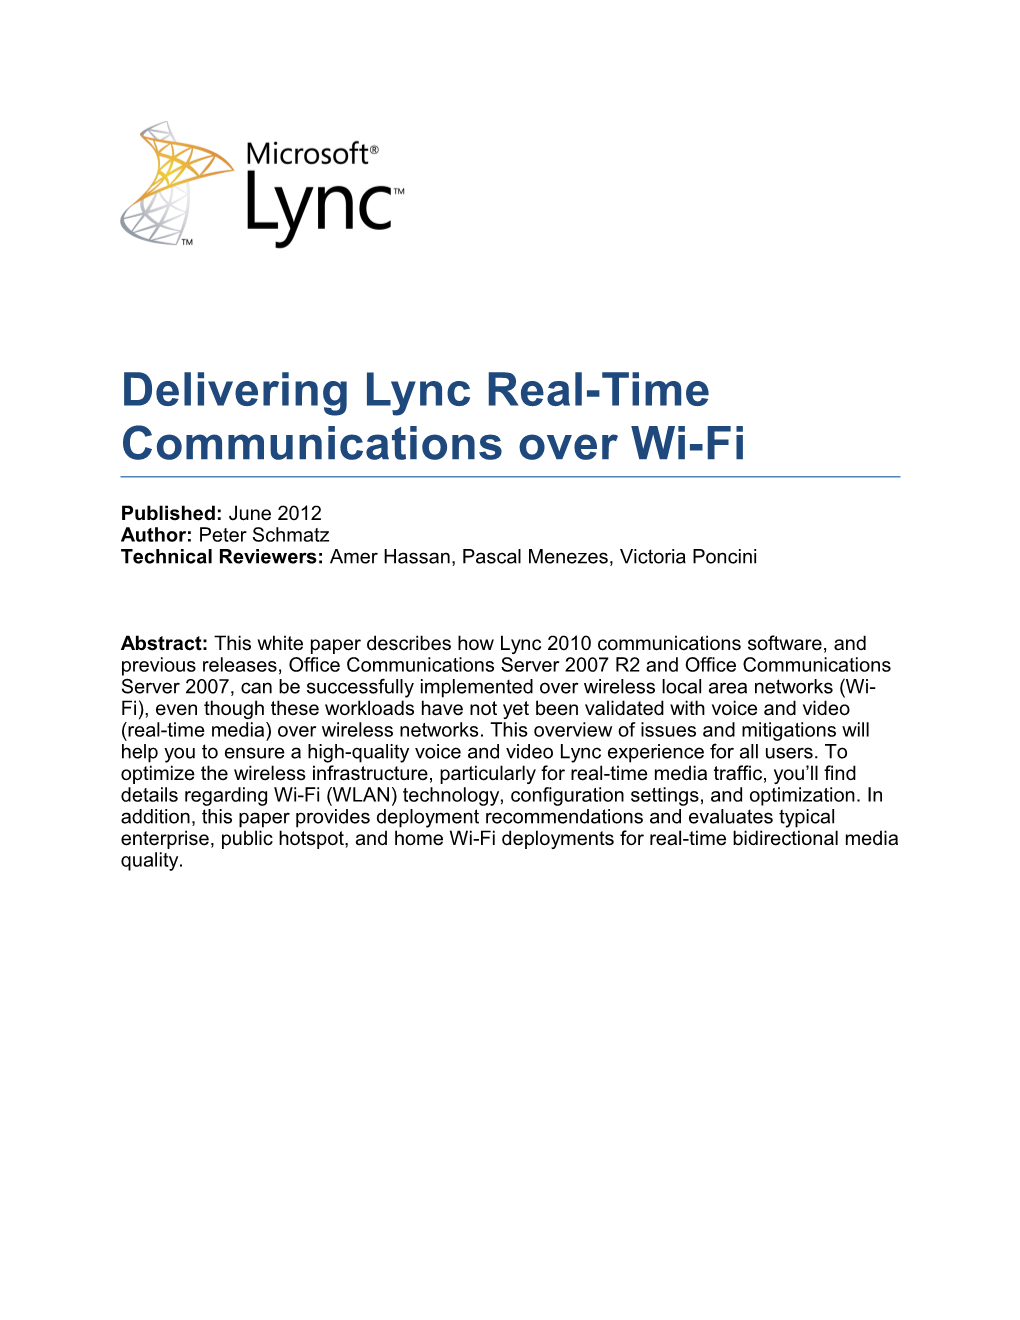 Delivering Lync Real-Time Communications Over Wi-Fi